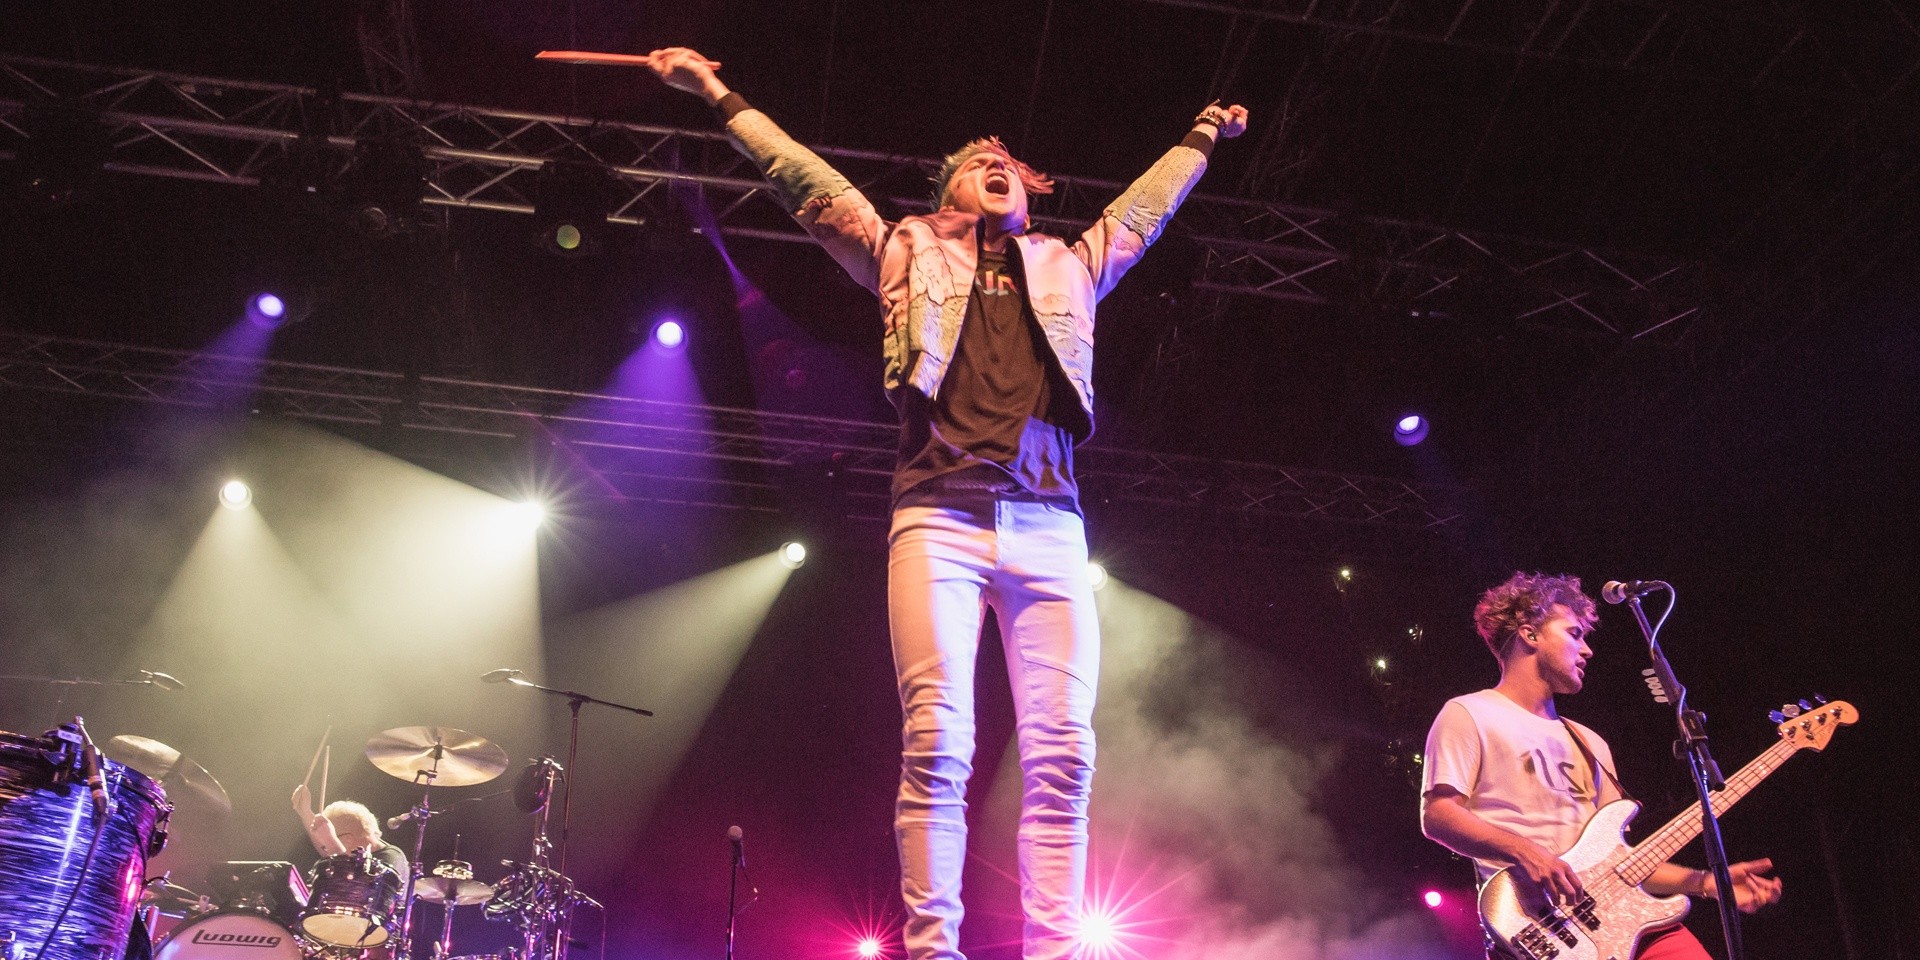 GIG REPORT: Walk The Moon stages luminous, spirited show at Fort Canning Park